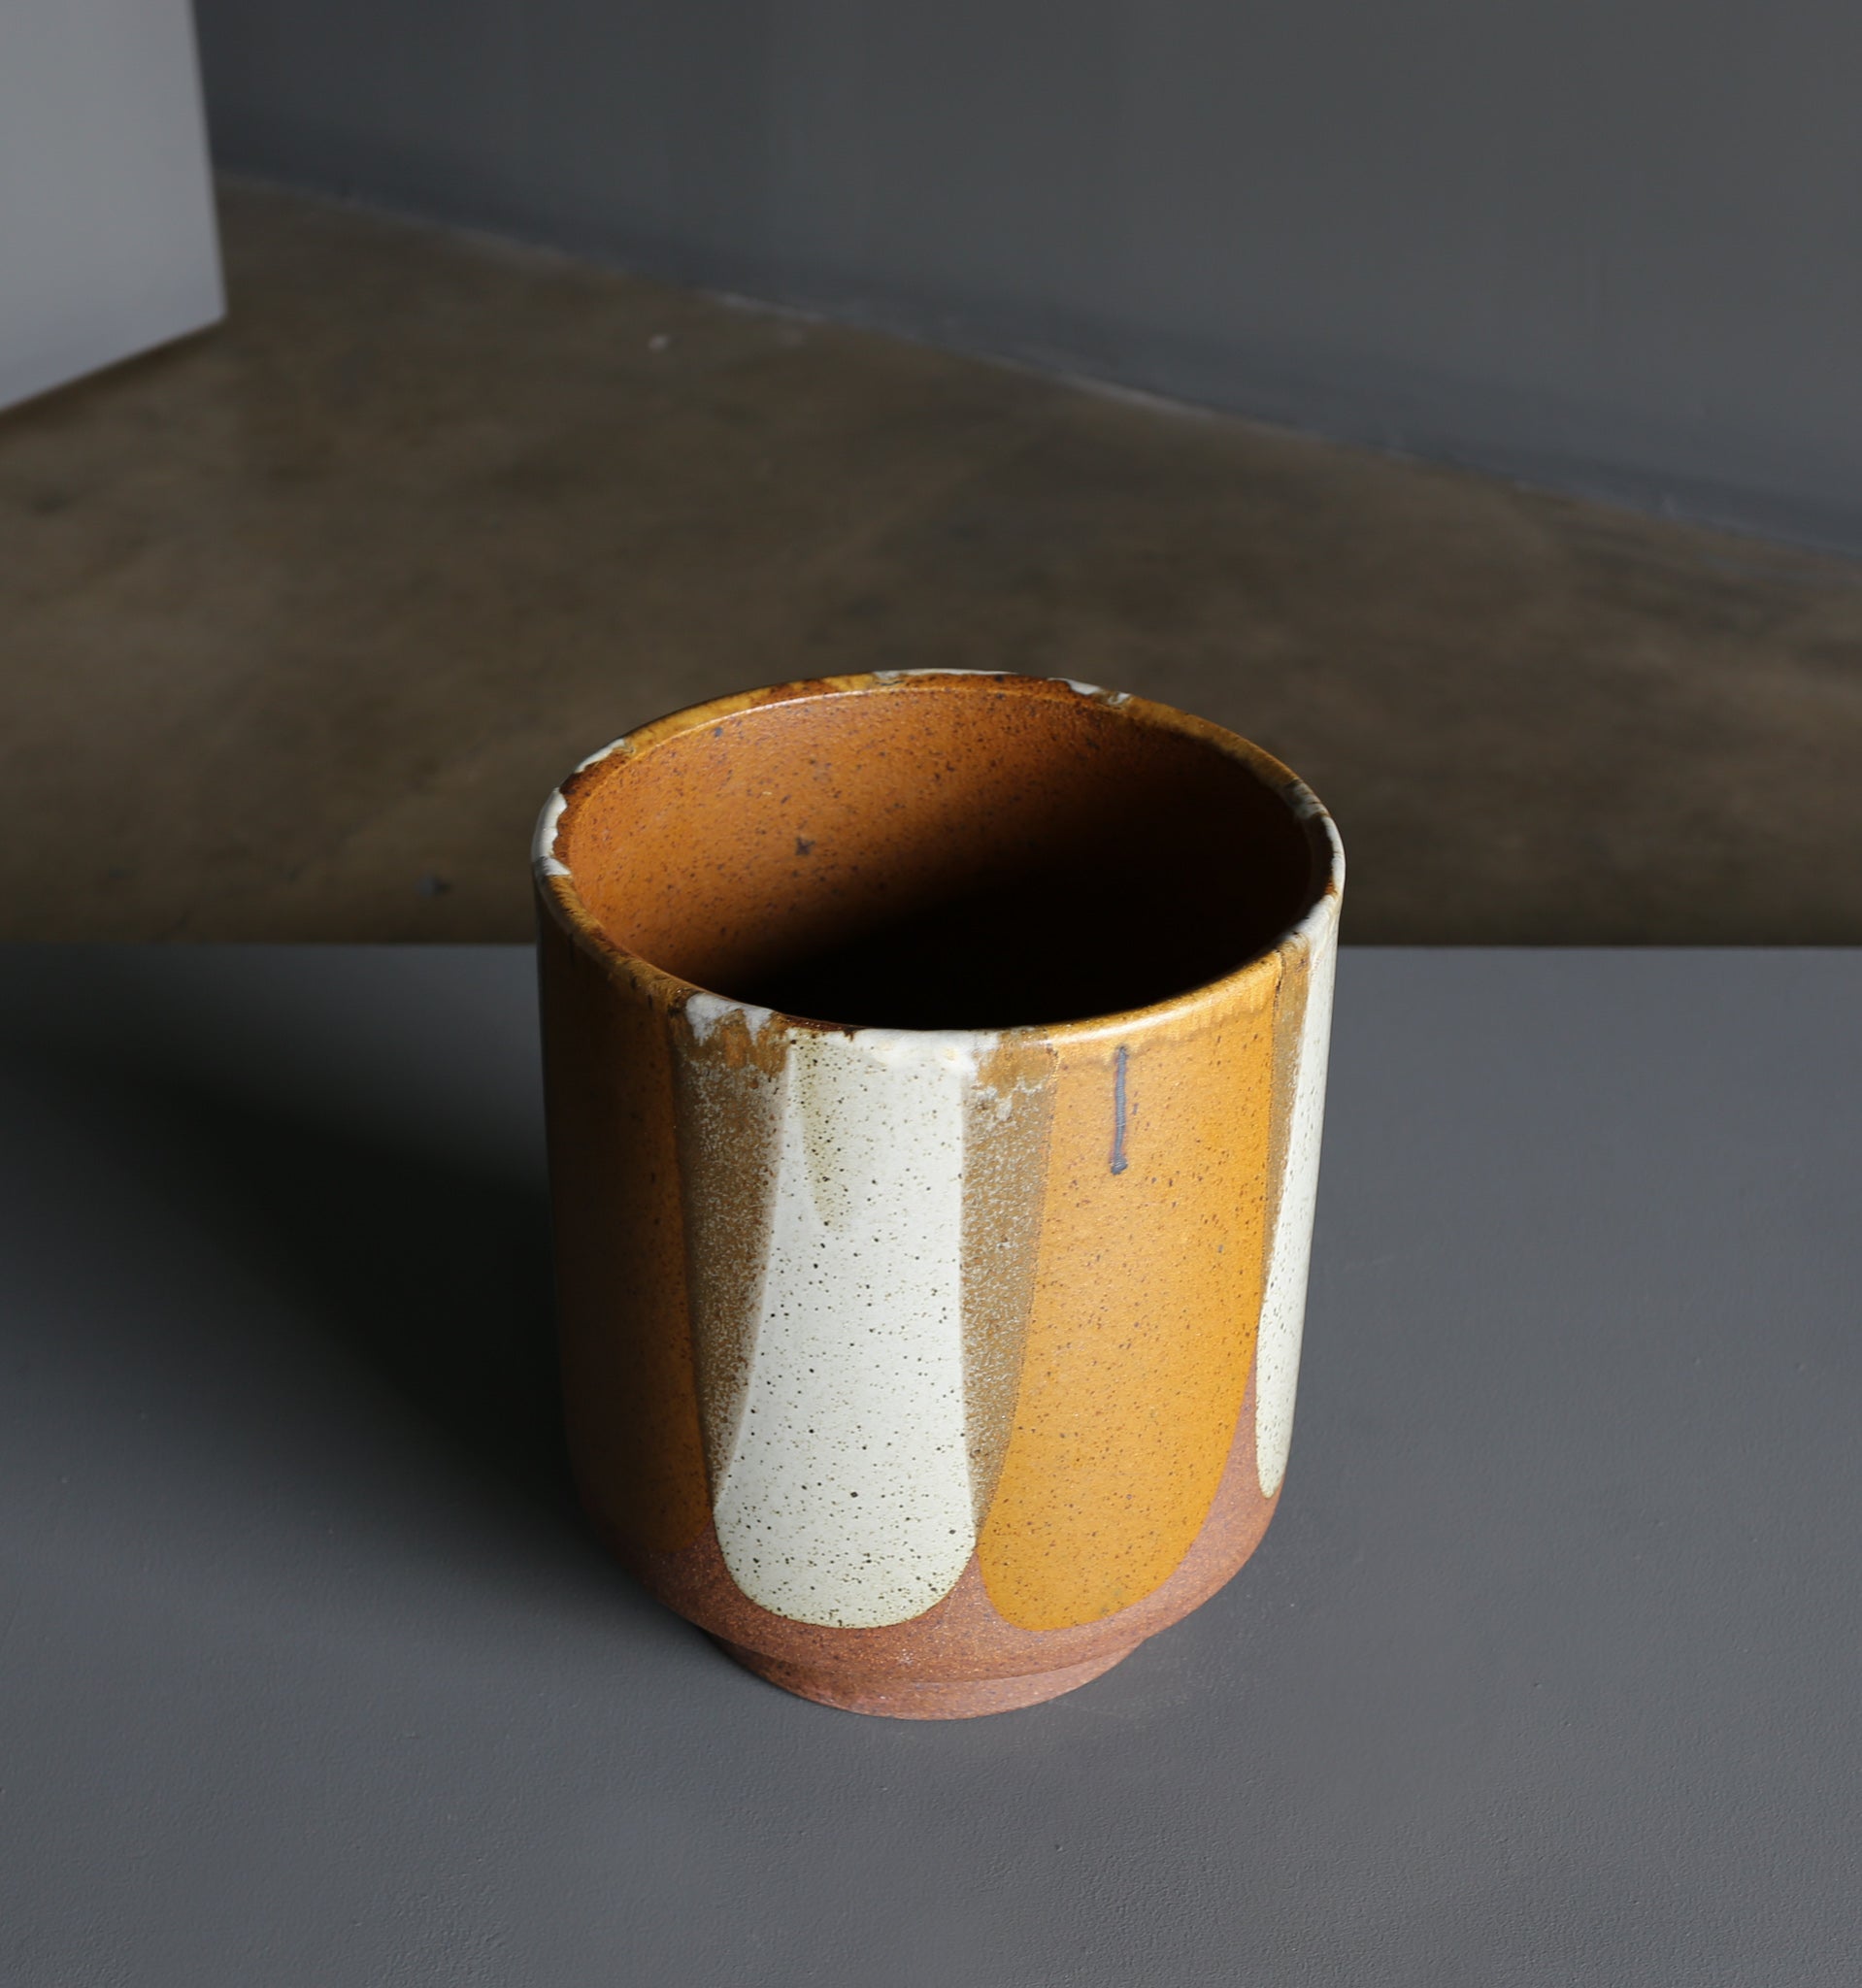 = SOLD = David Cressey " Flame " Glaze Planter for Architectural Pottery circa 1970